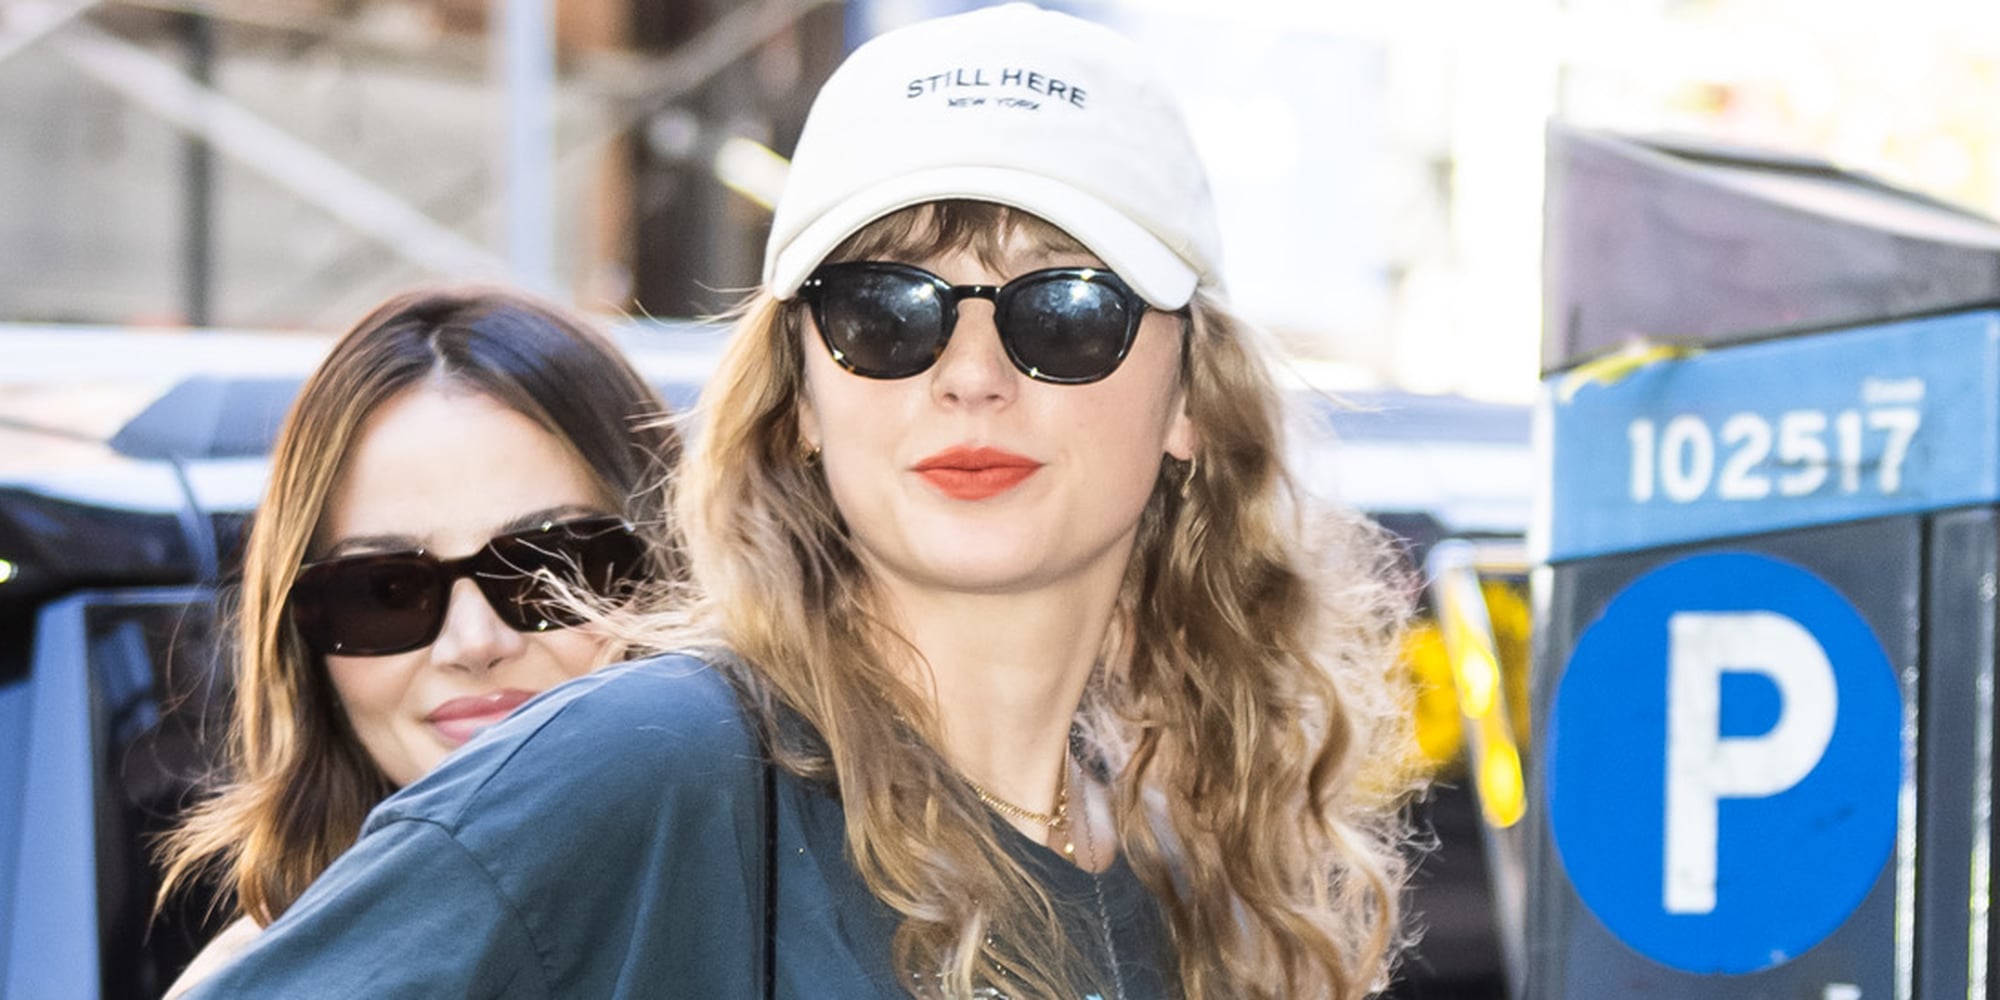 Where to Buy New Balance 1906R Shoes that Taylor Swift Wore in NYC